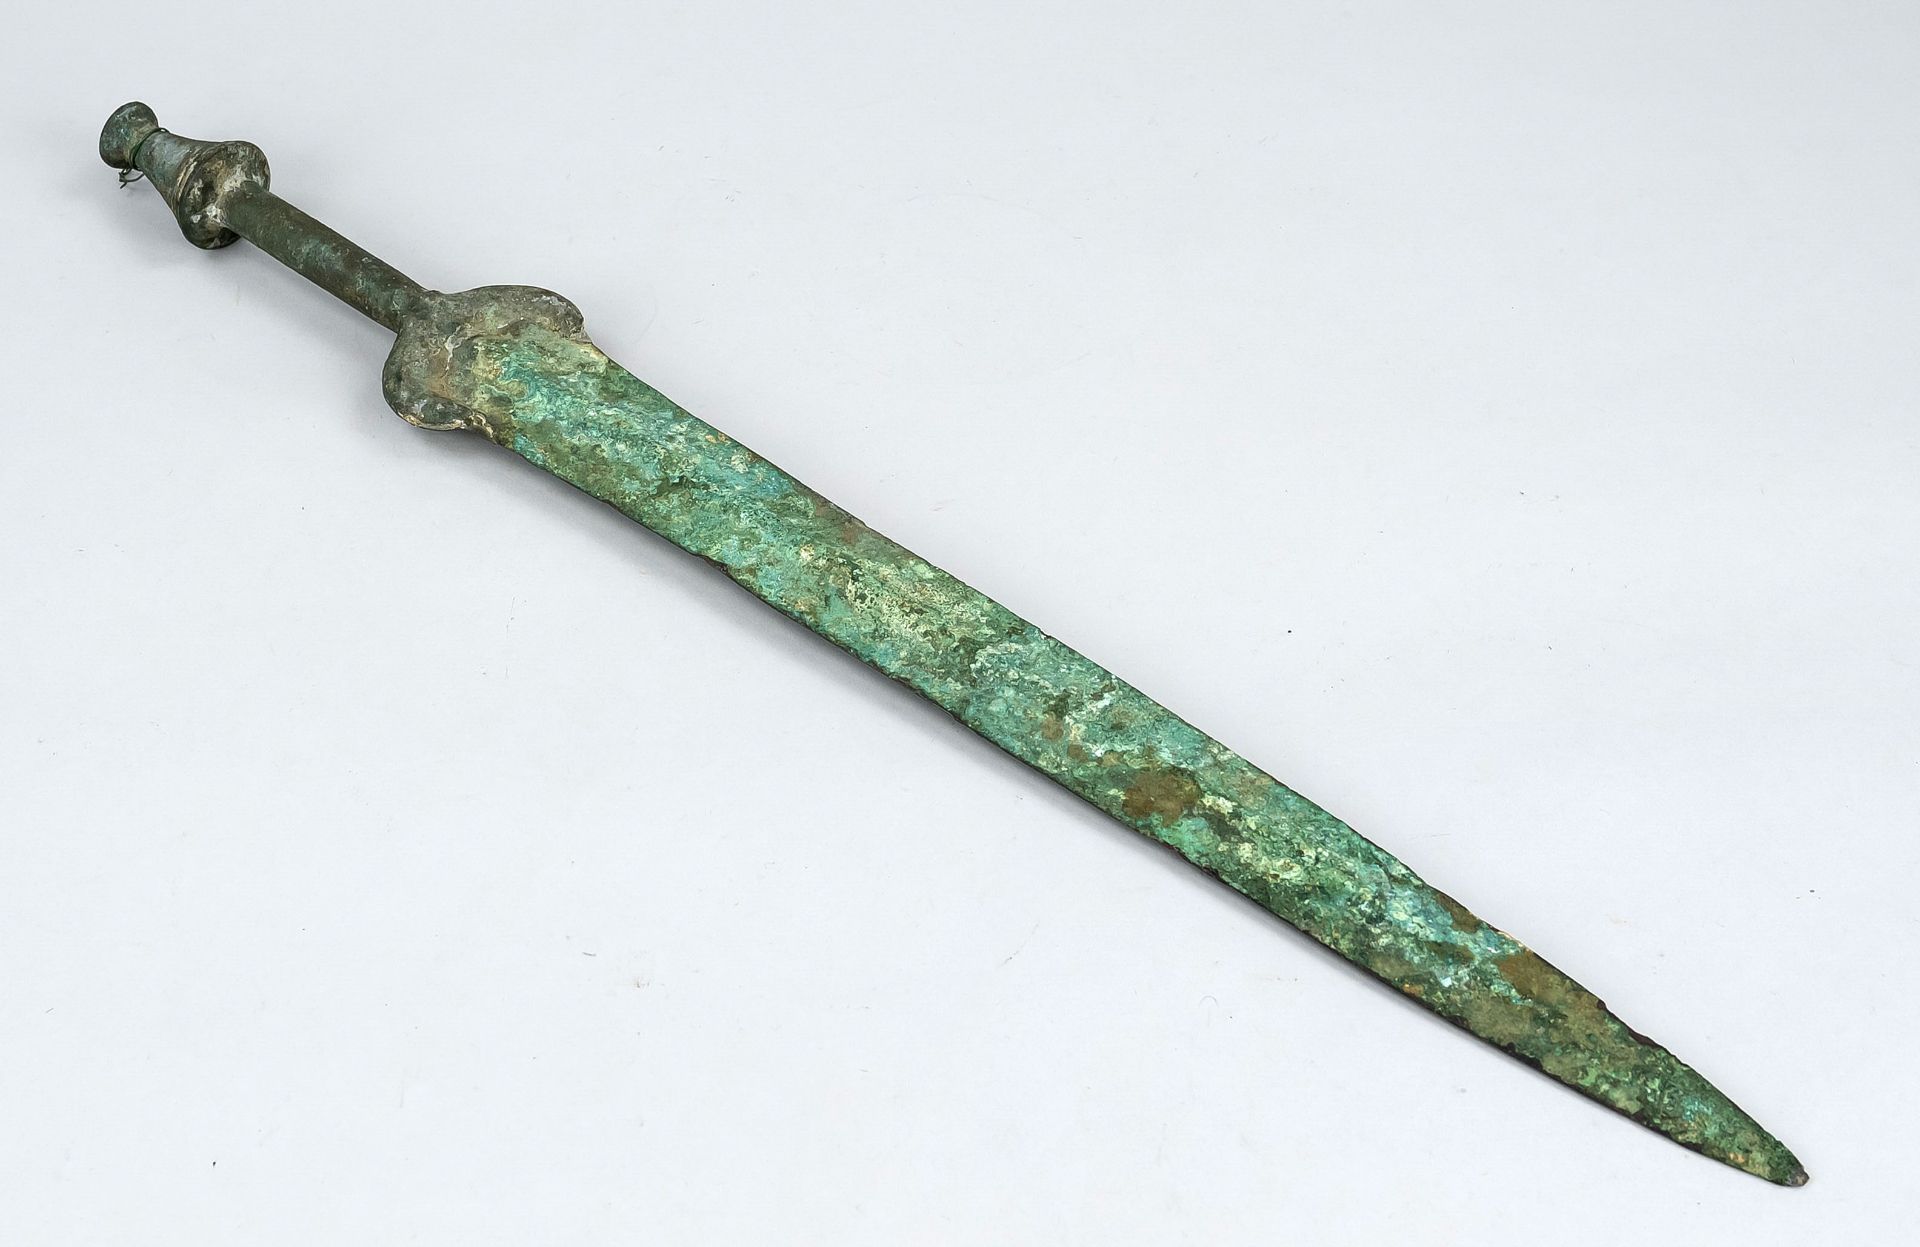 Sword, bronze, ca 1000 BC, probably Amlash or Luristan. Double-edged blade with central ridge.